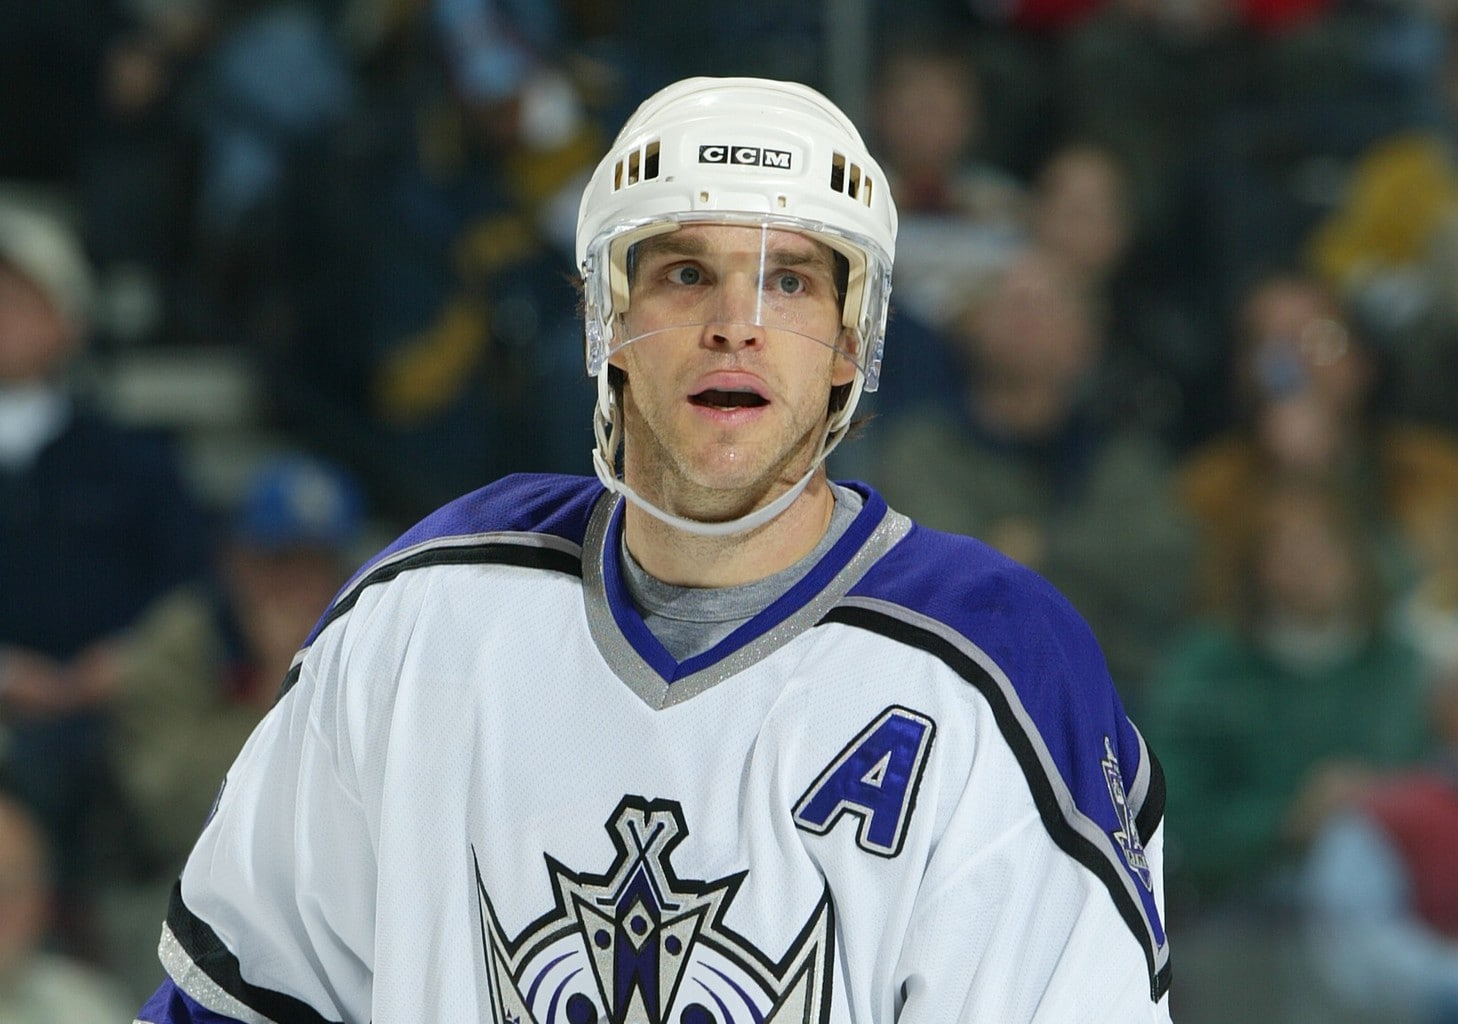 20 Questions with #20 - Interview with Luc Robitaille